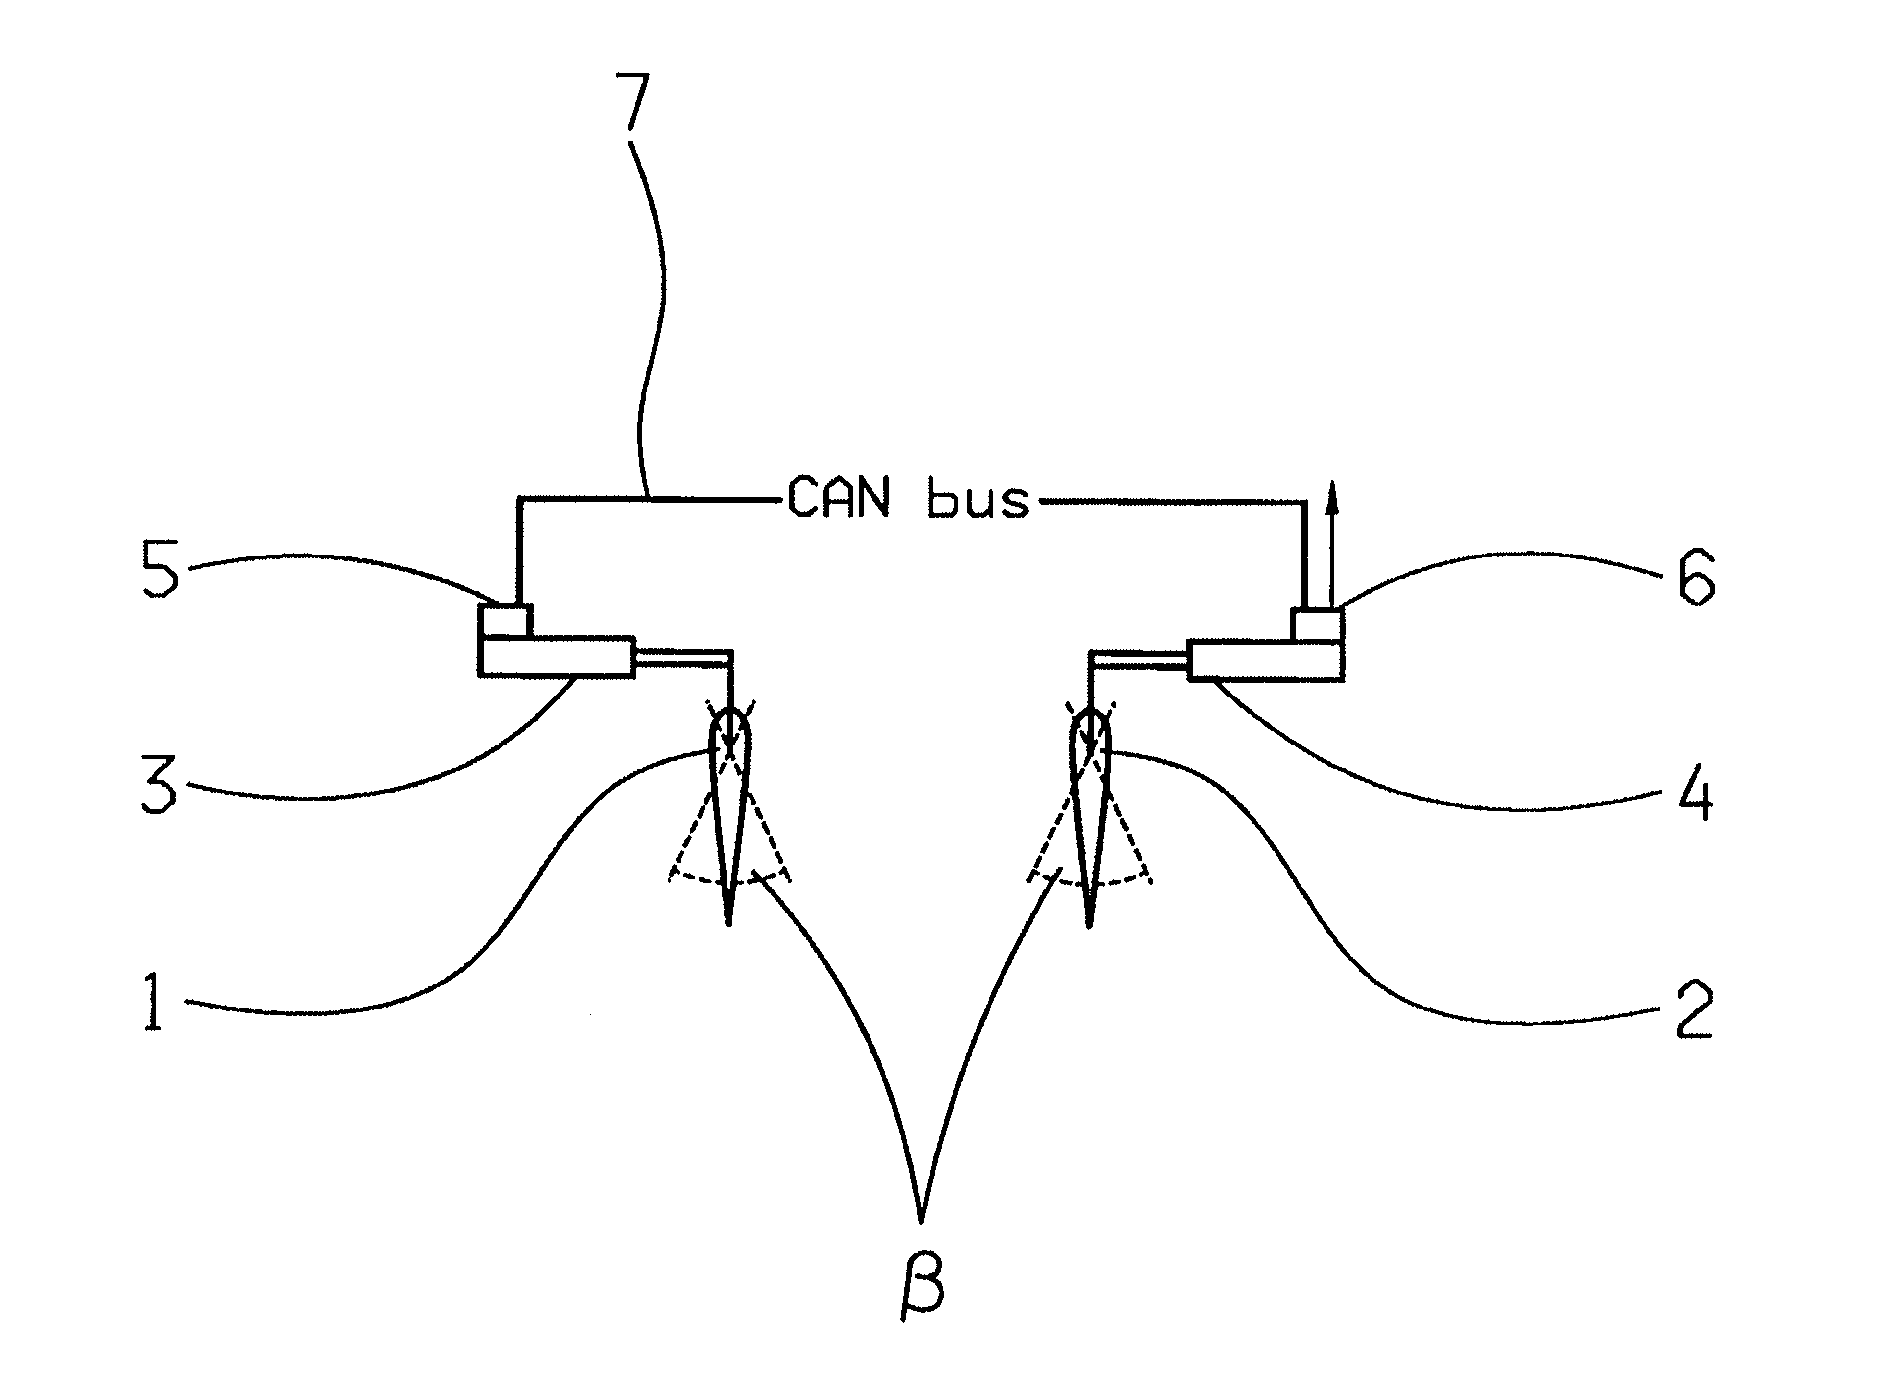 Method for verifying the toe angle of a ship's rudders